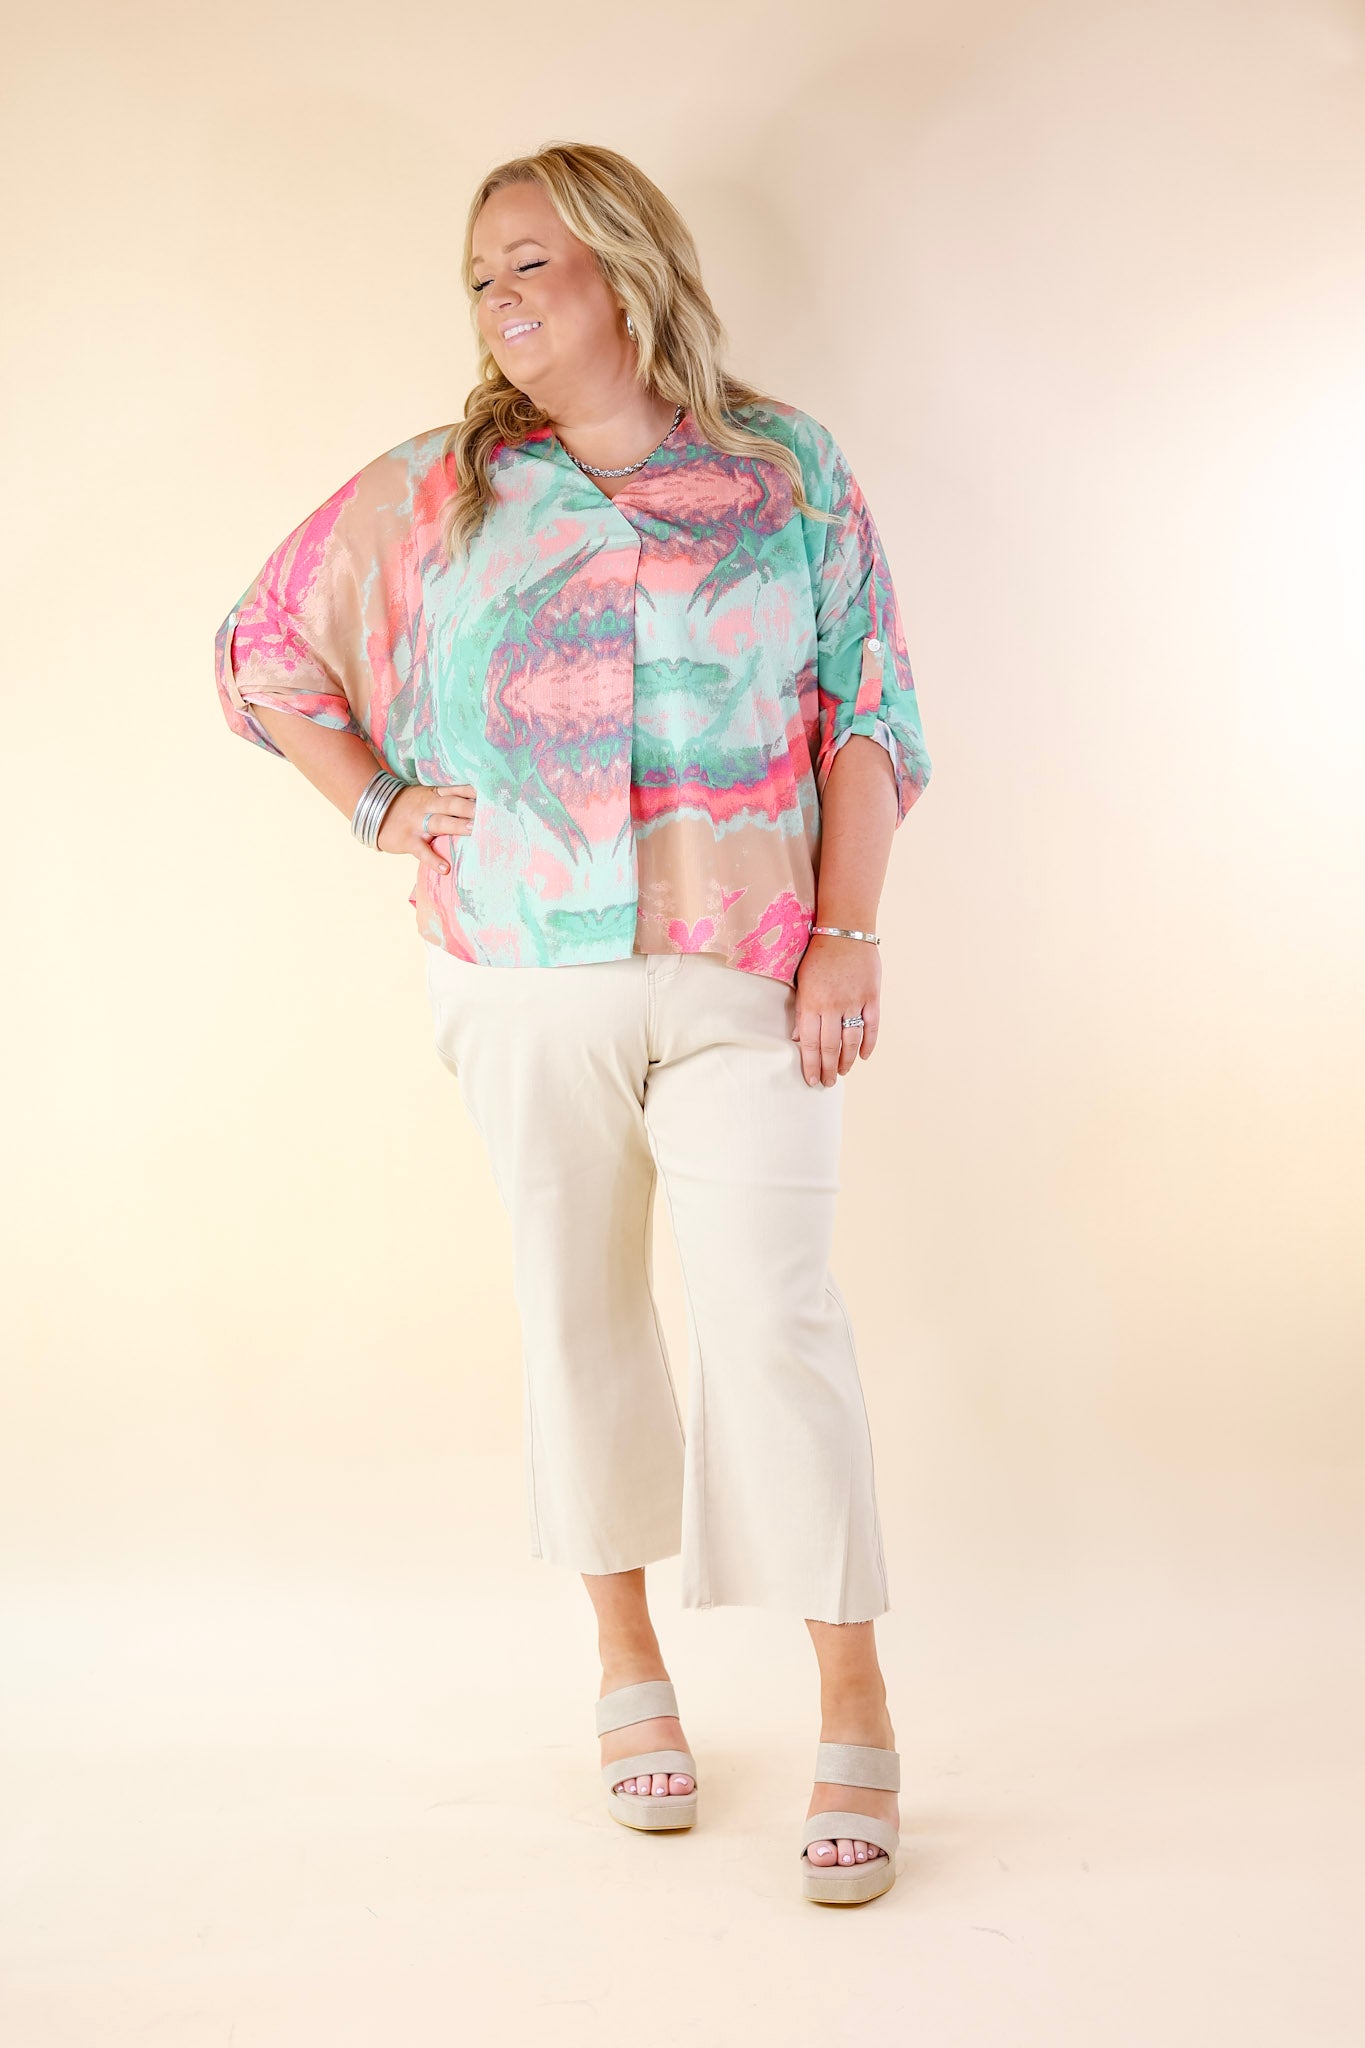 Colorful Dreams Half Sleeve Top With Pink Marble Print in Beige - Giddy Up Glamour Boutique